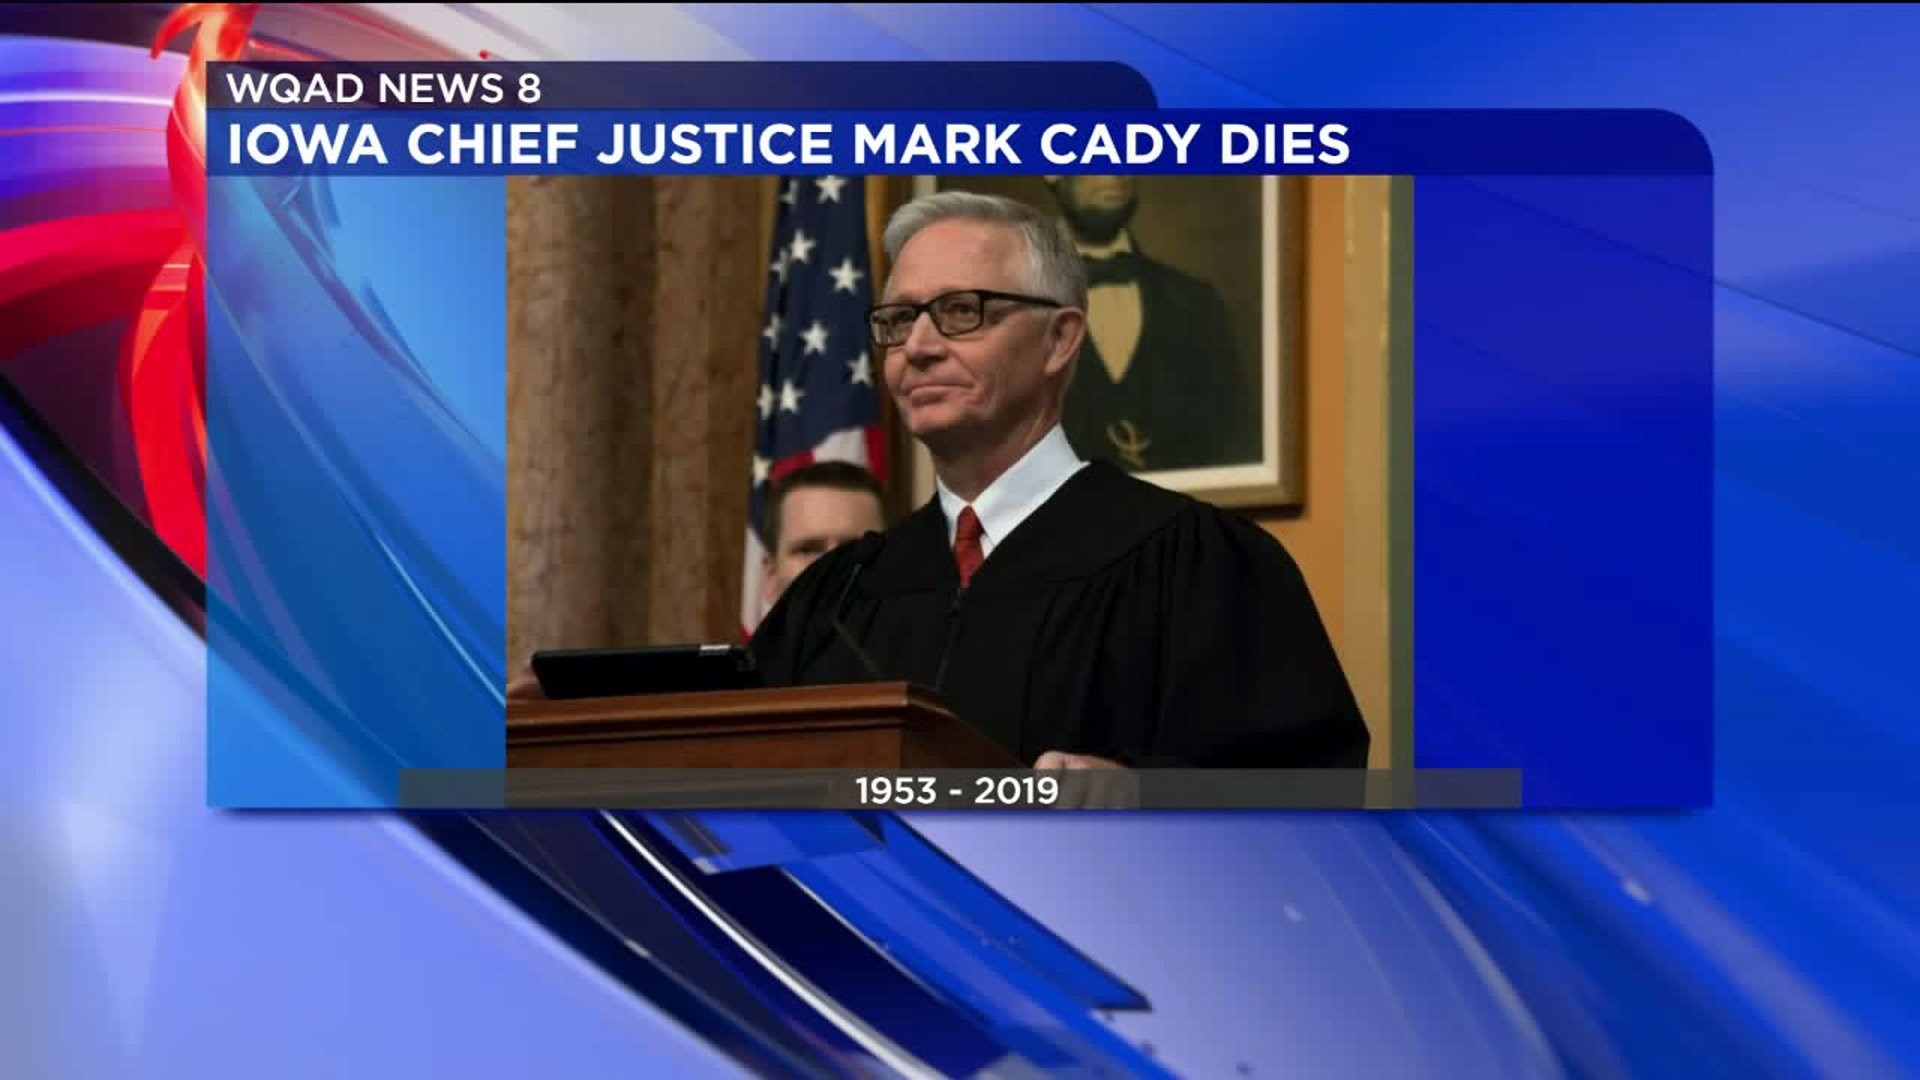 Iowa Supreme Court Chief Justice Mark Cady dies unexpectedly